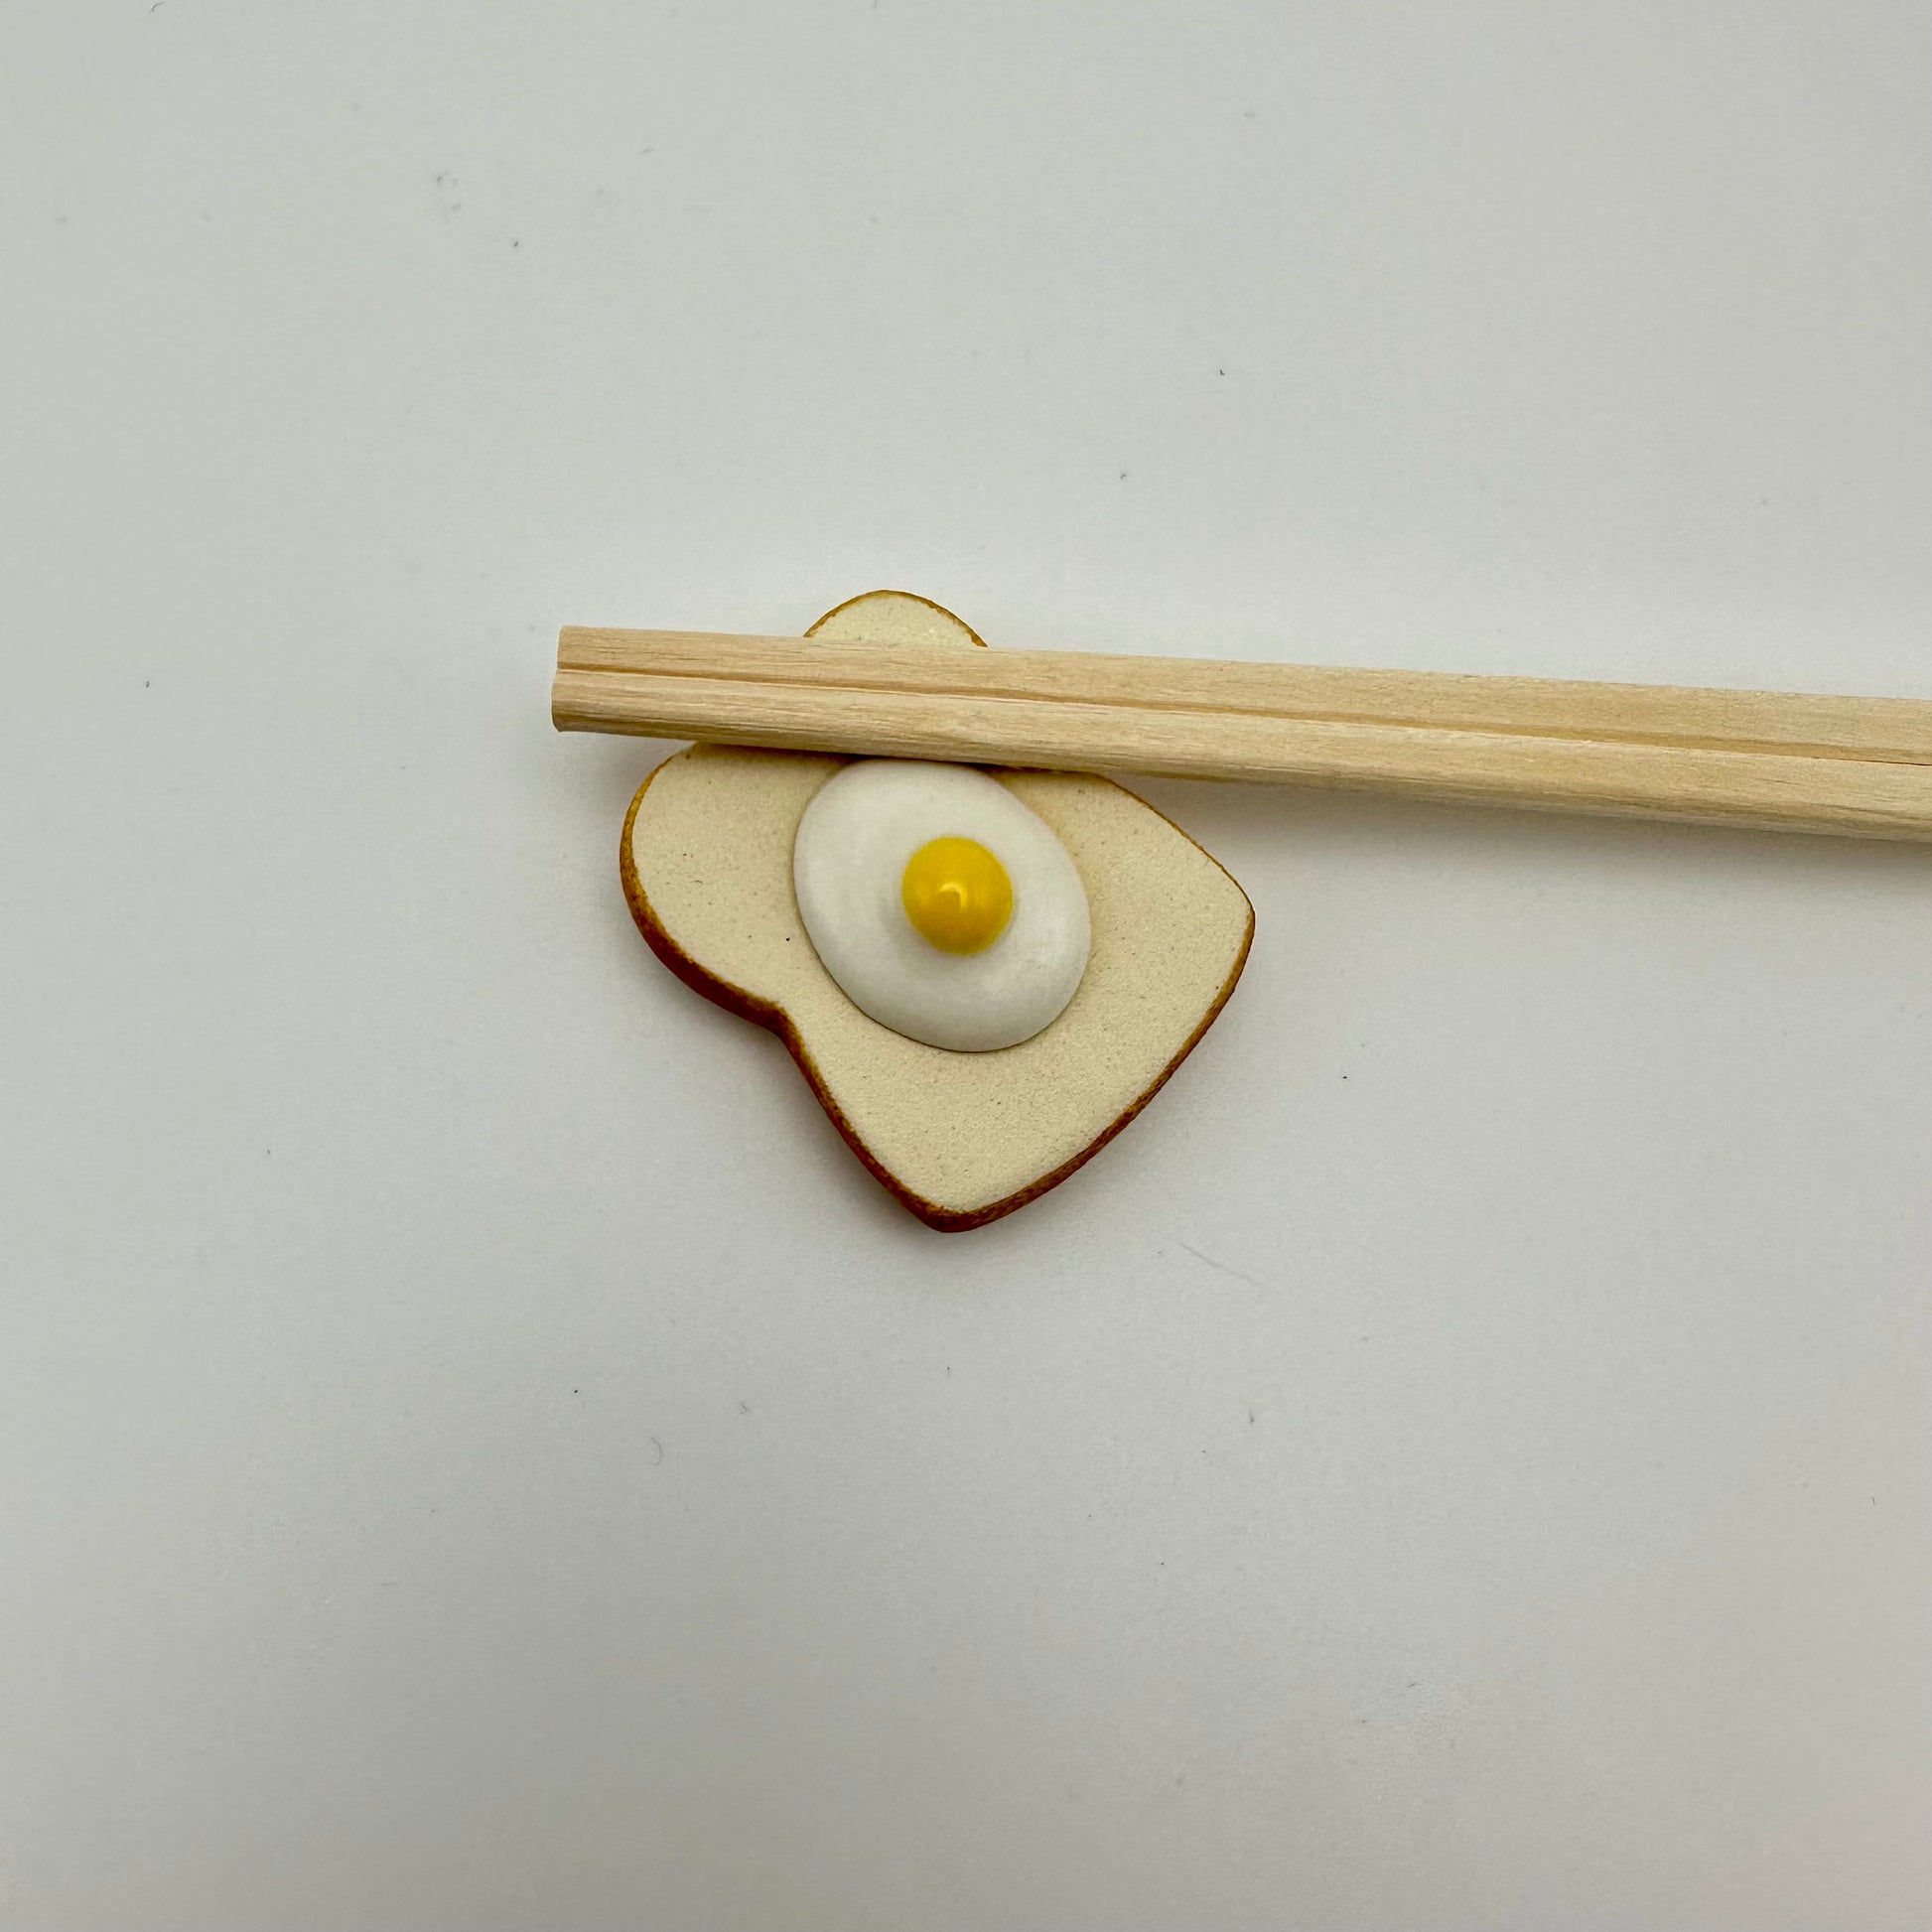 Egg on toast with chopsticks on top.